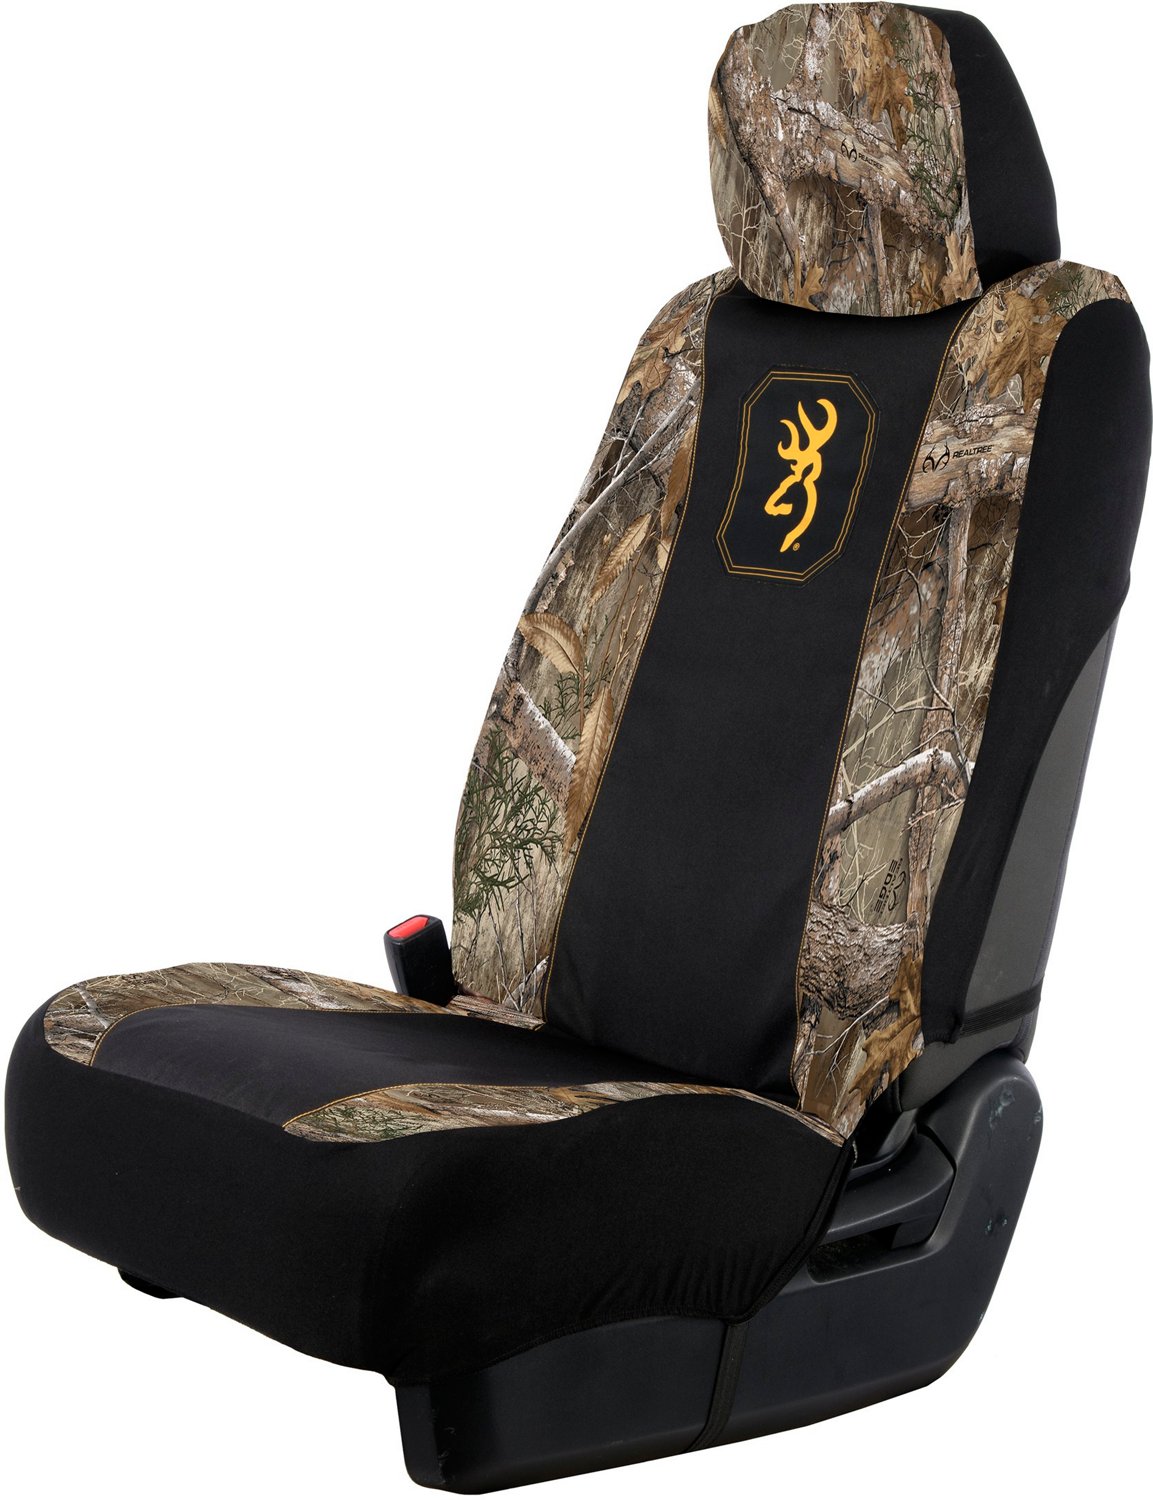 Browning Morgan Realtree Low Back Seat Covers 2-Pack | Academy